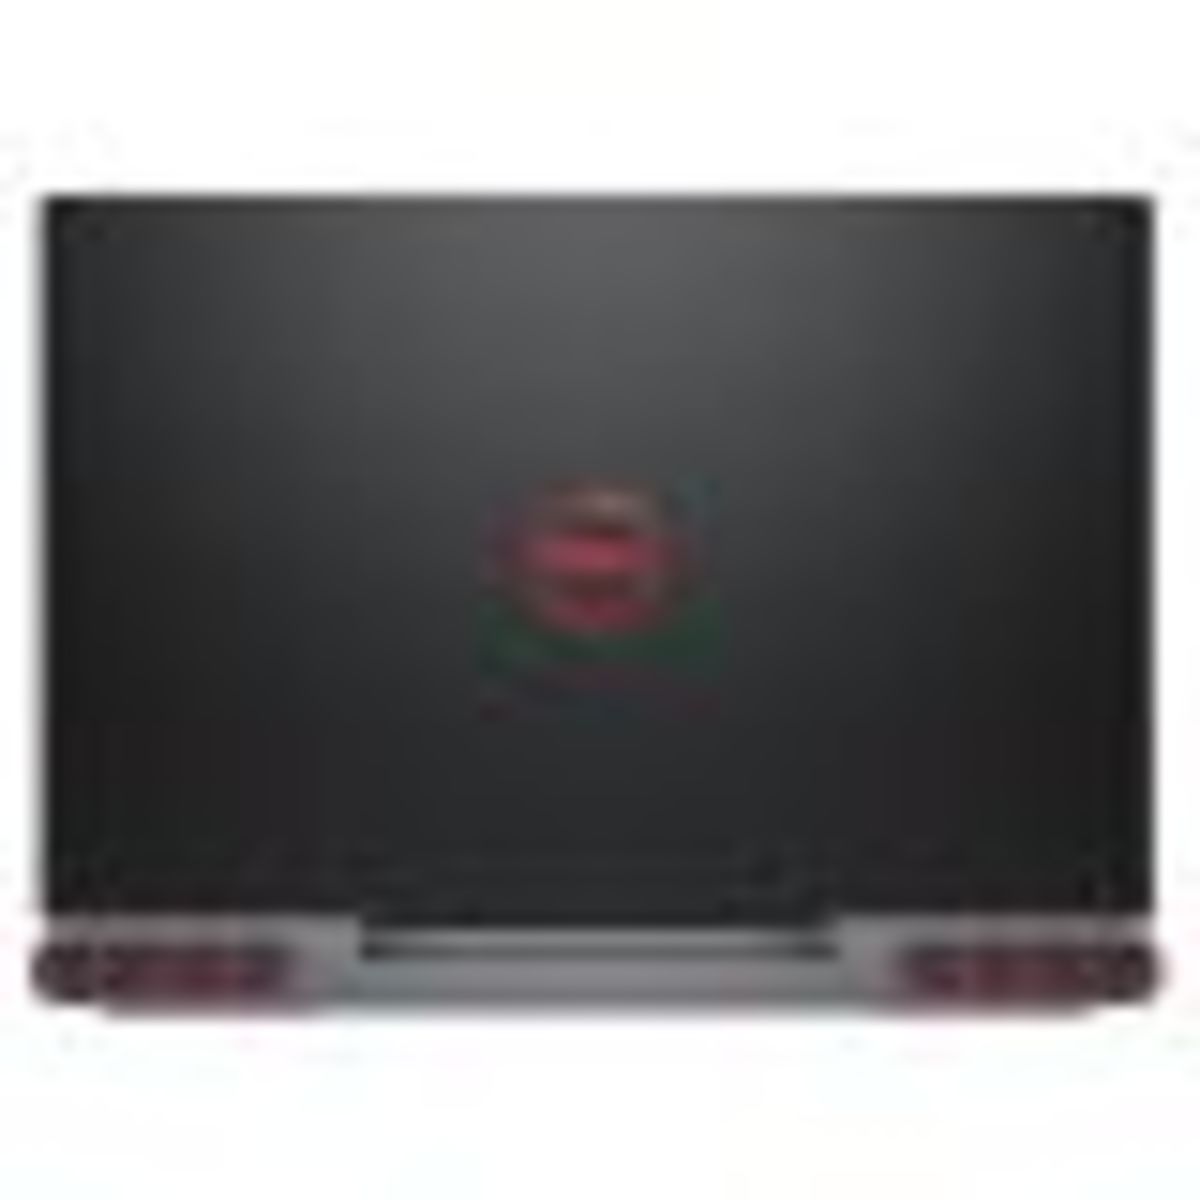 Dell Gaming Laptop 7567-INS-1050 Ci7 Black